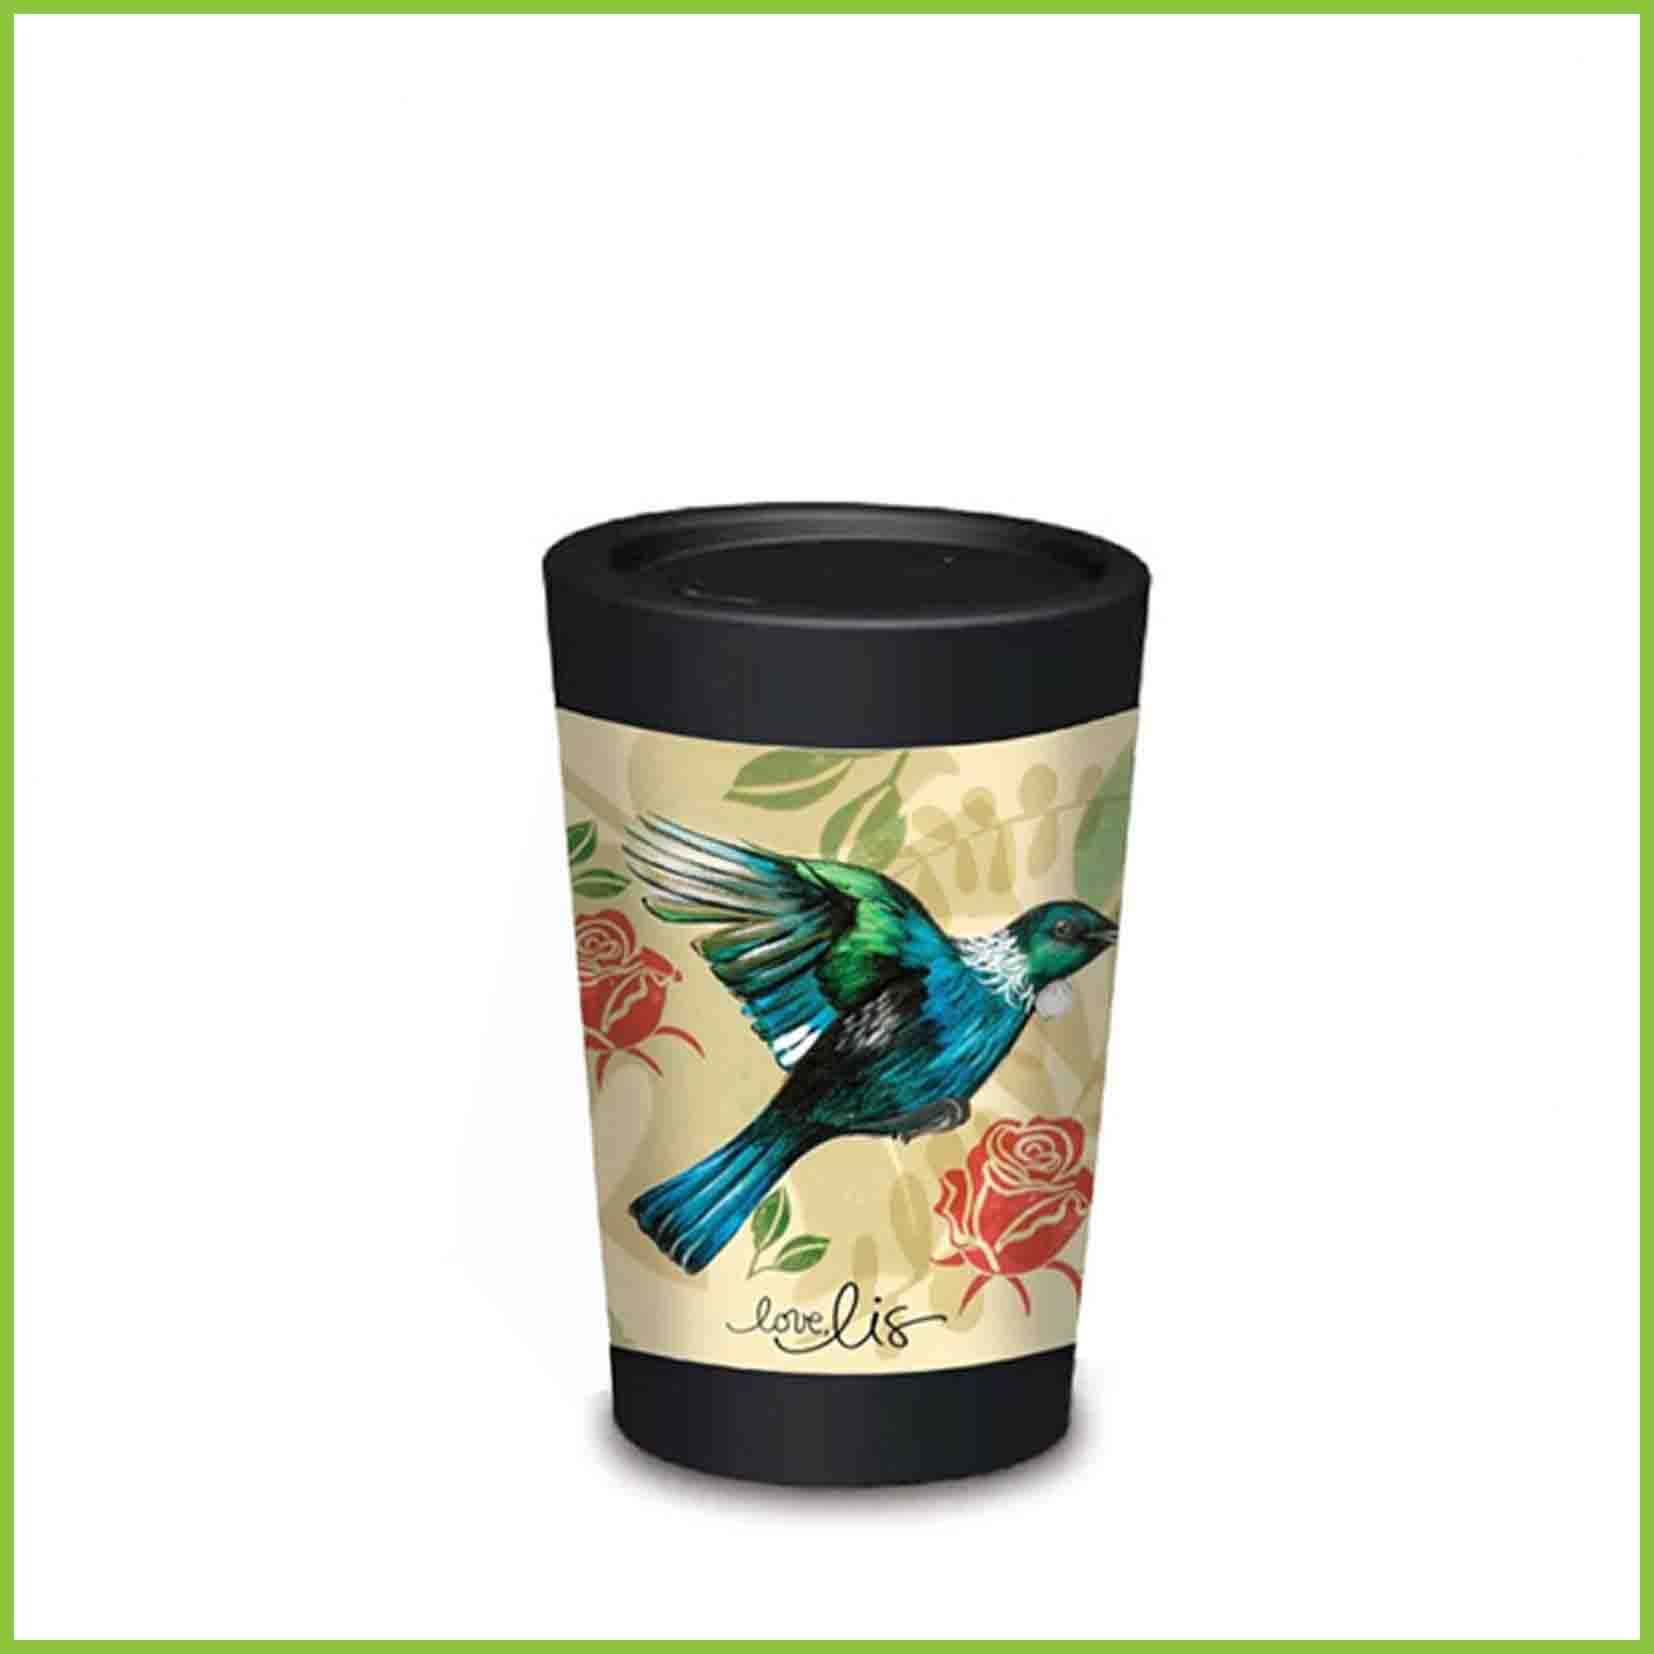 A lightweight reusable cup from CuppaCoffeeCup with a Tui and Roses design.